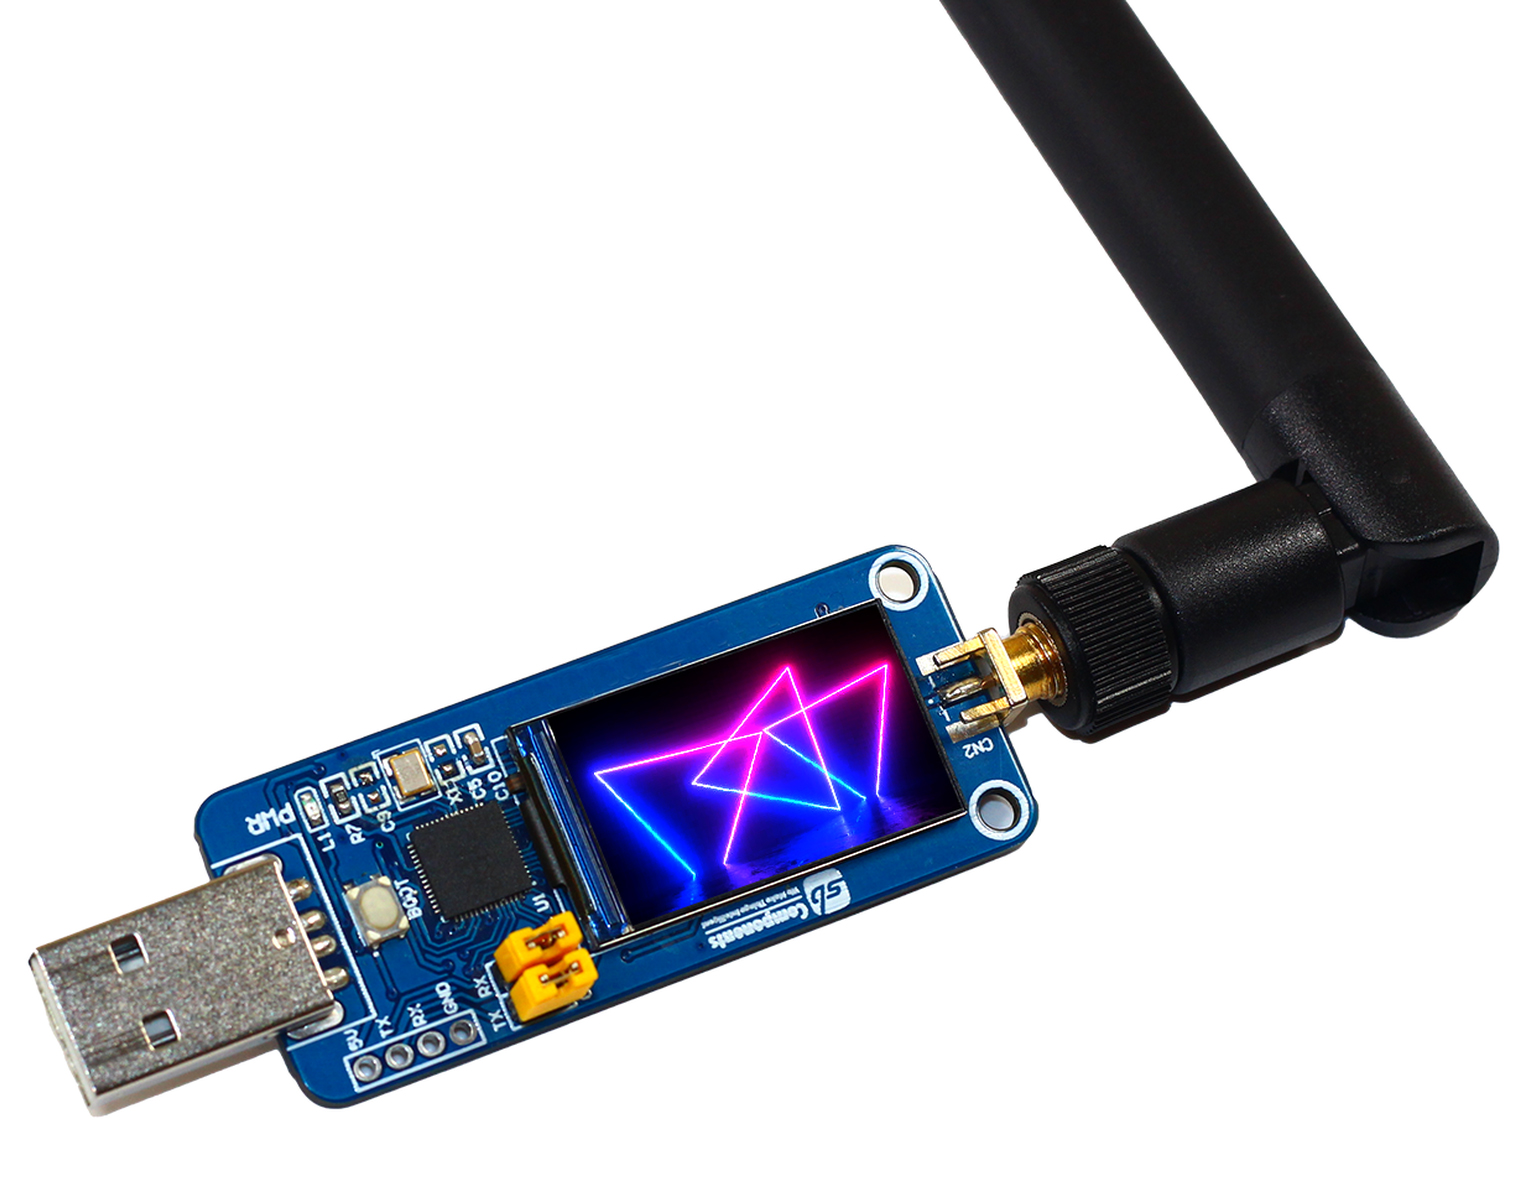 The RangePi is an open-source USB dongle that enables you to work with the LoRa network from any computer or device.